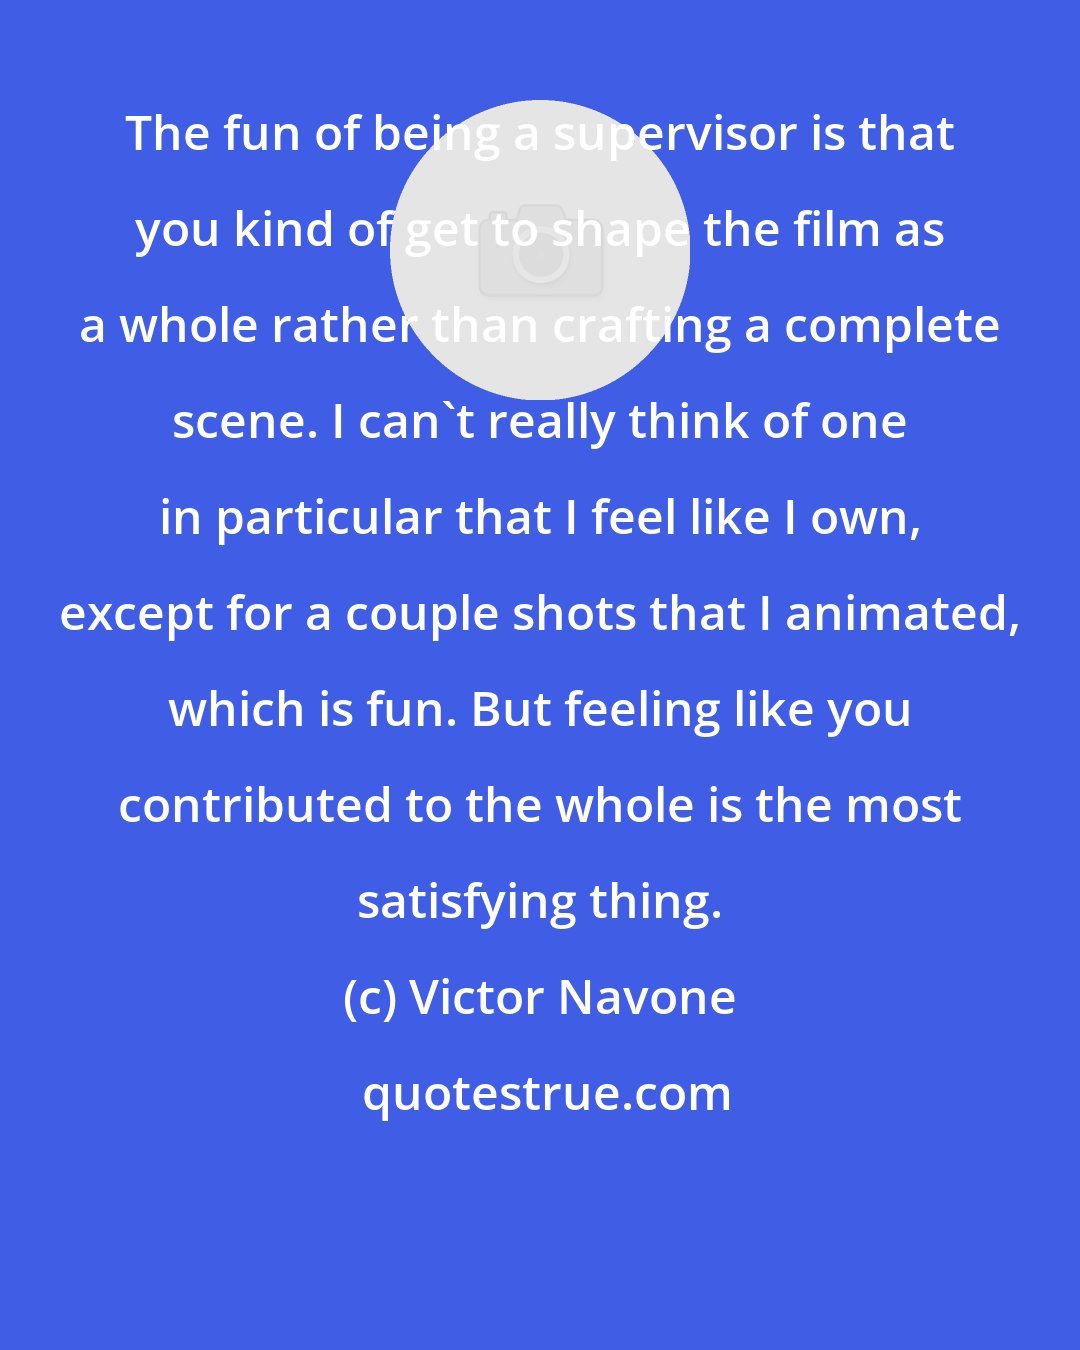 Victor Navone: The fun of being a supervisor is that you kind of get to shape the film as a whole rather than crafting a complete scene. I can't really think of one in particular that I feel like I own, except for a couple shots that I animated, which is fun. But feeling like you contributed to the whole is the most satisfying thing.